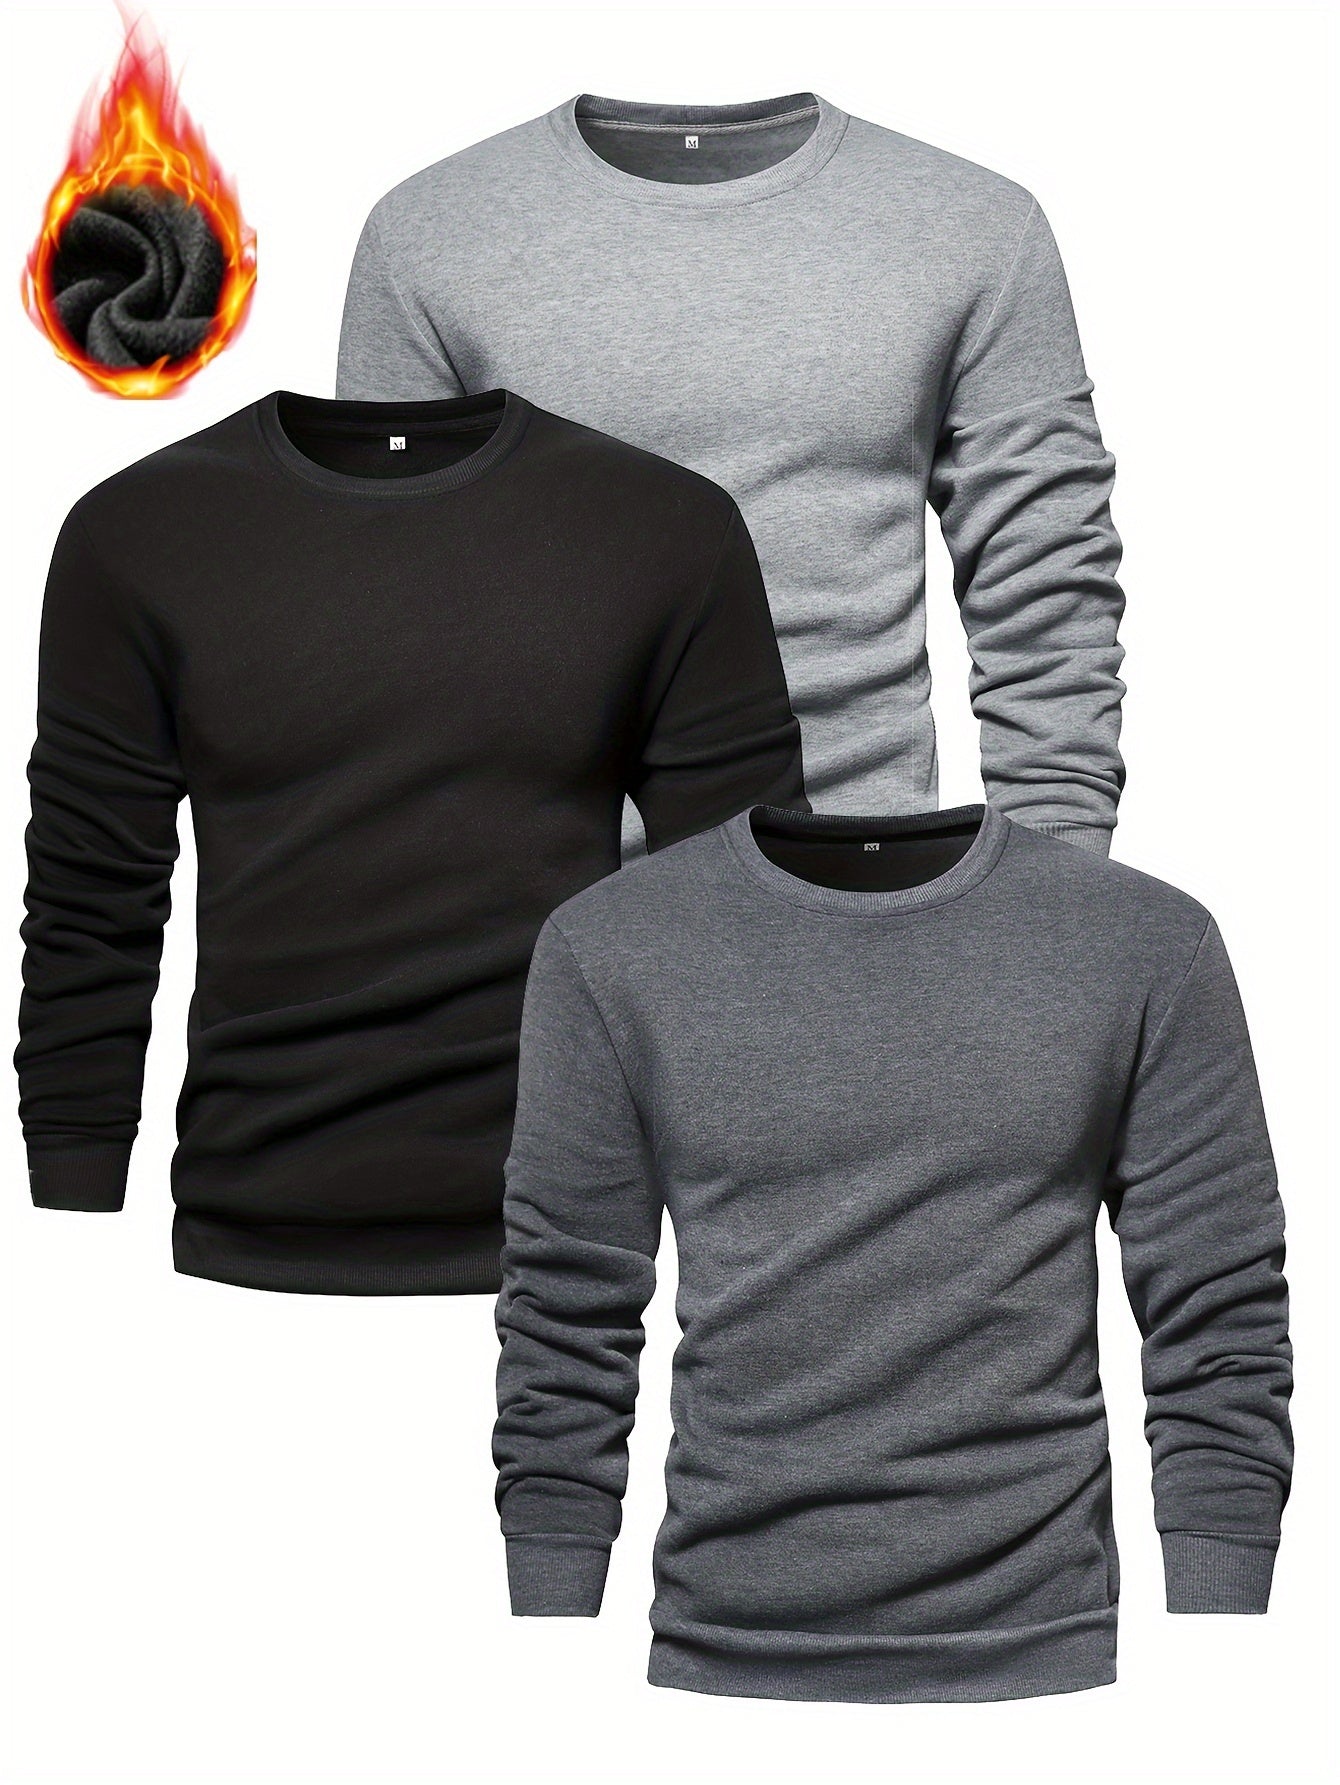 3pcs Men's Autumn And Winter Thickened Warm Skin-friendly Soft Sweater, Skinny Long Sleeve Crew Neck Warm Undershirts Tops